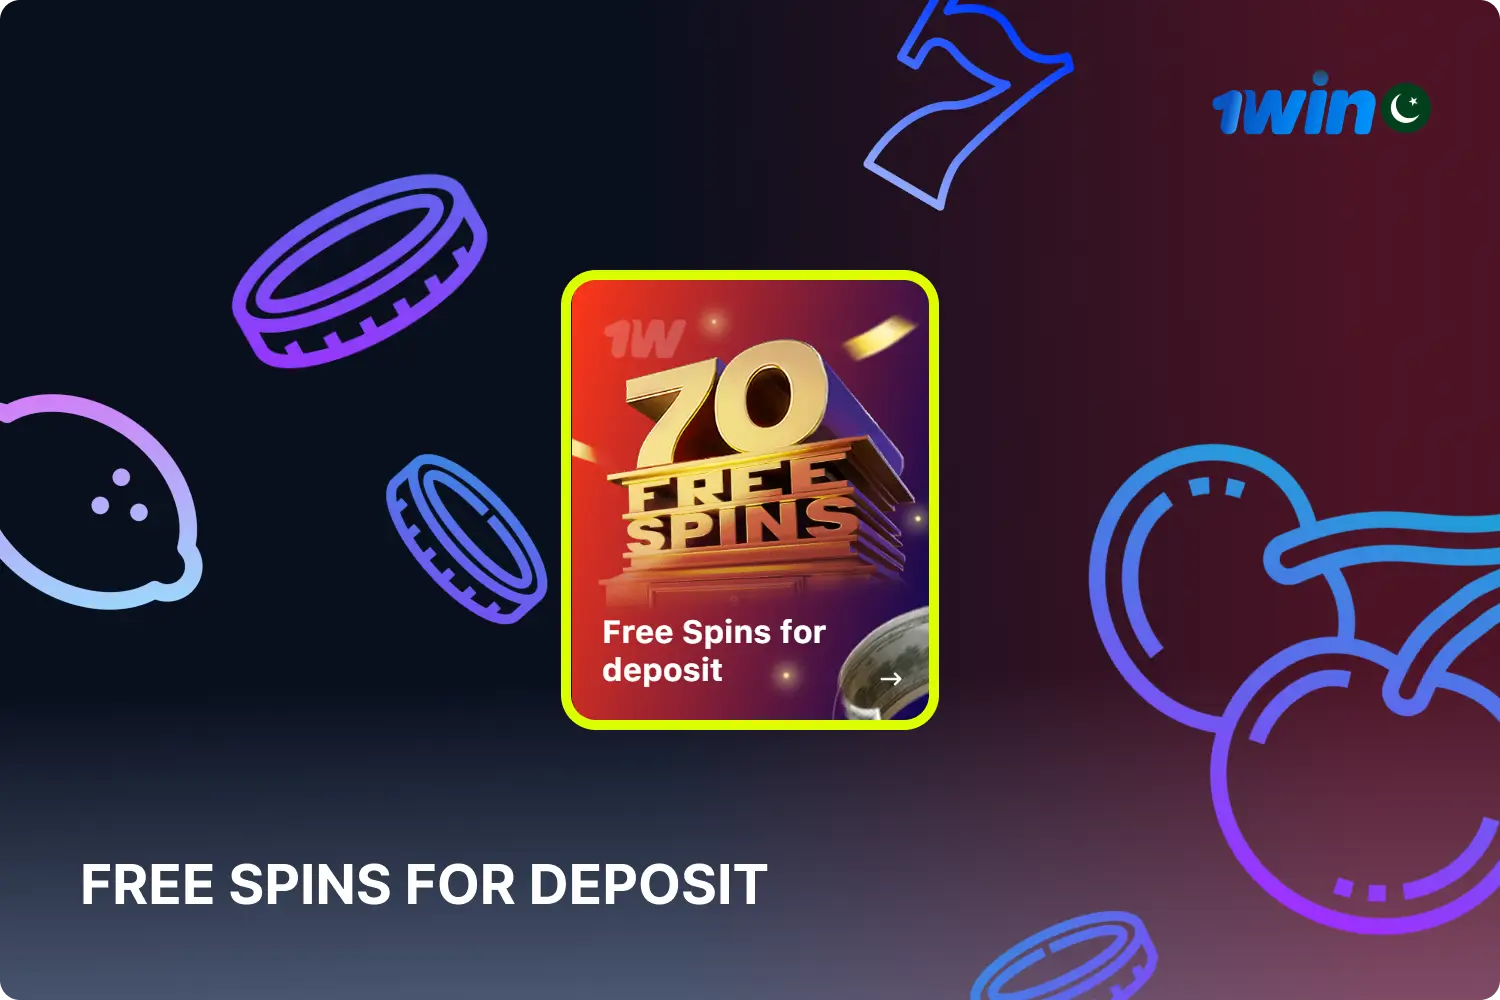 New 1win Pakistan players can get 70 free spins on their first deposit as part of the promotion.